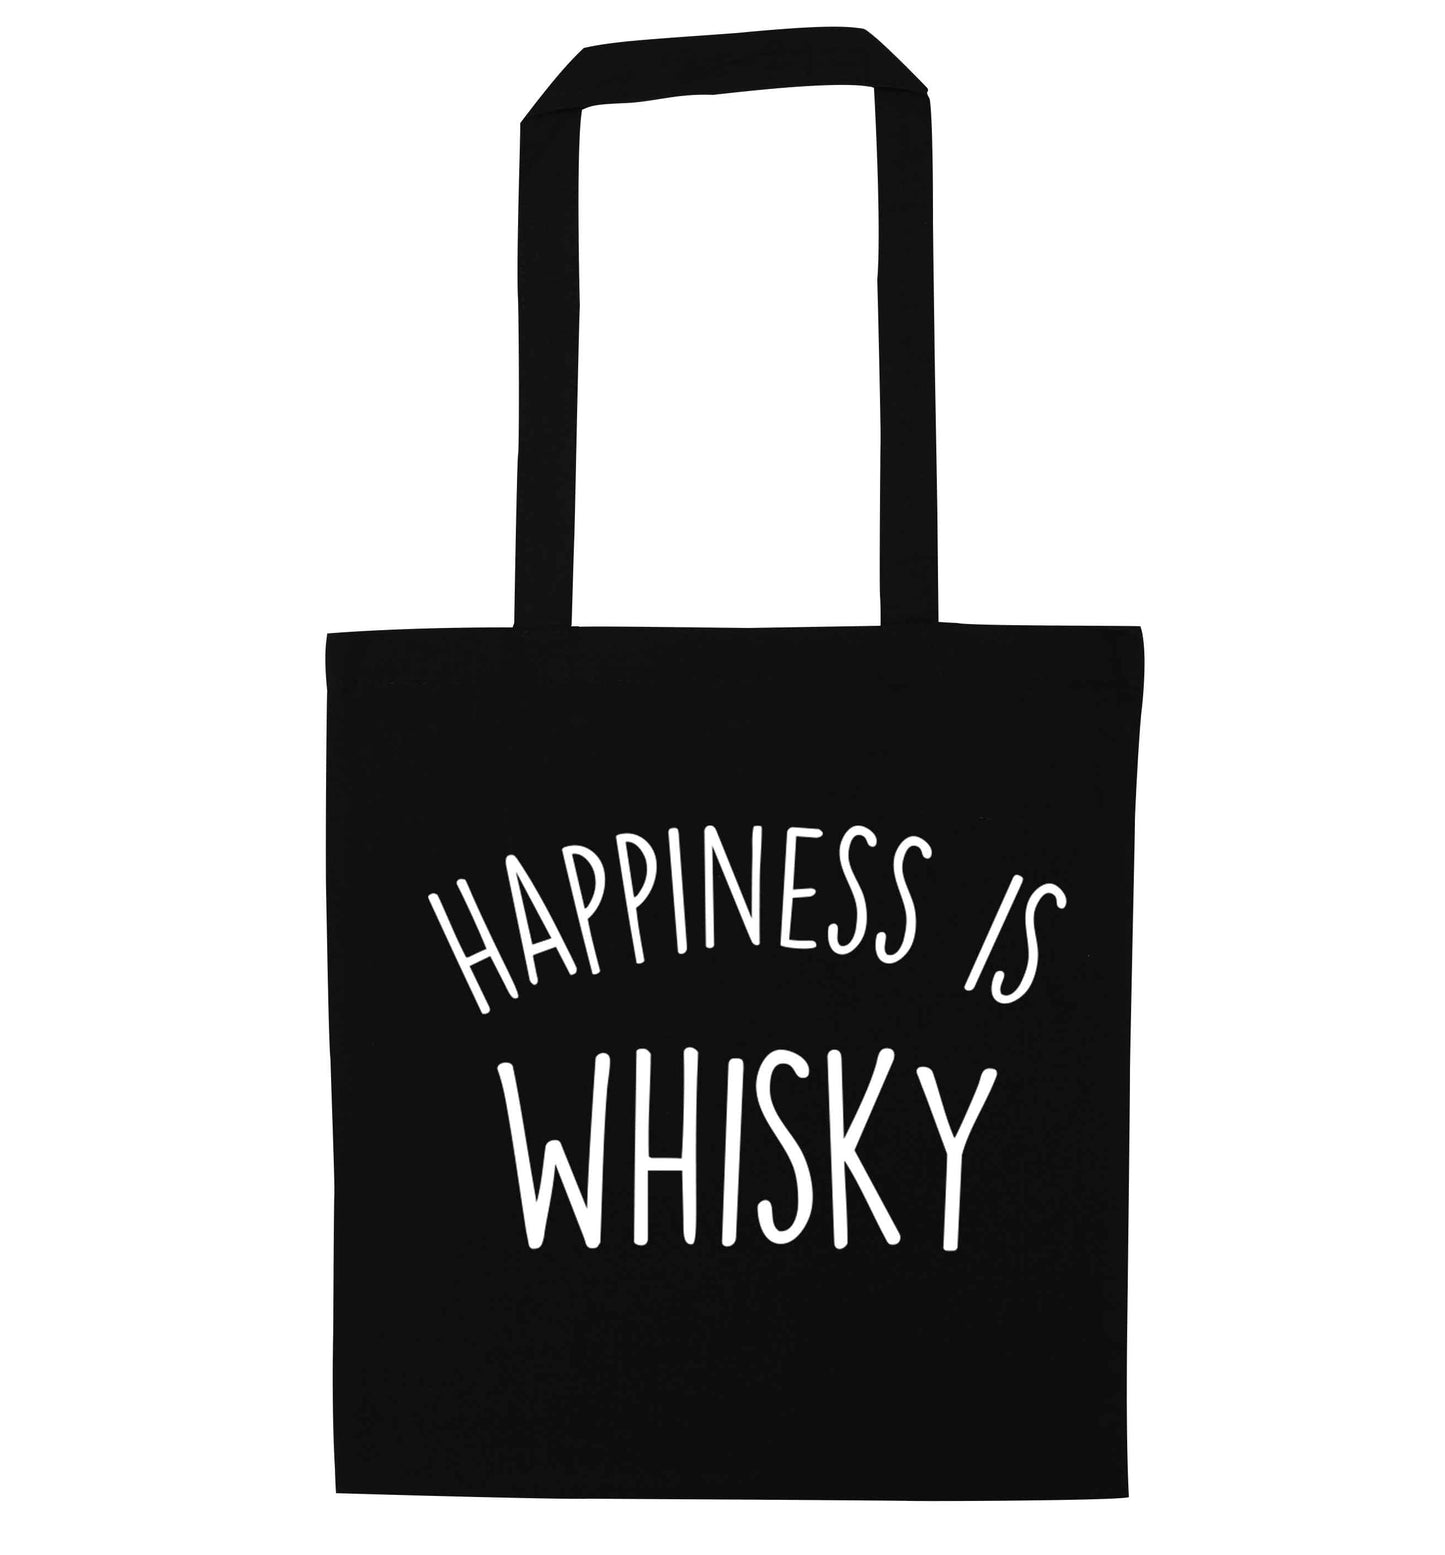 Happiness is whisky black tote bag